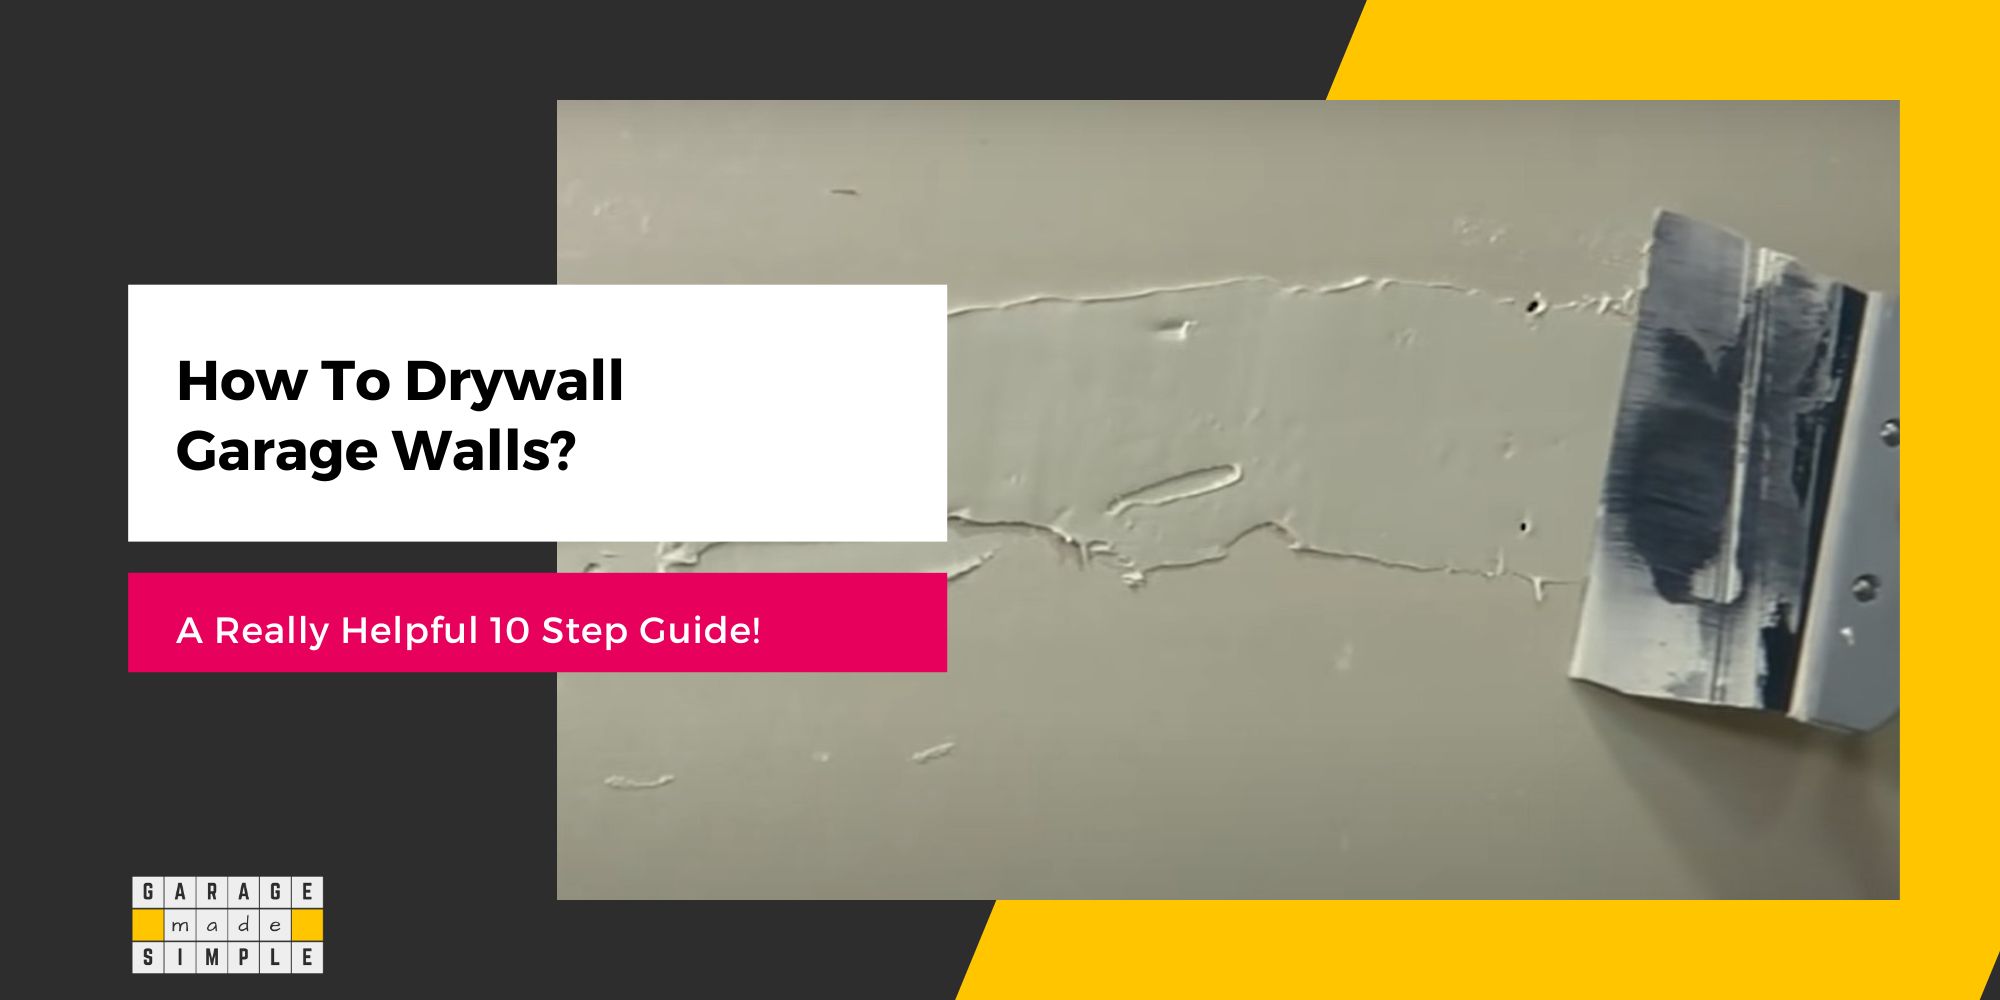 How To Drywall Your Garage Walls? (A Really Helpful 10 Step Guide!)